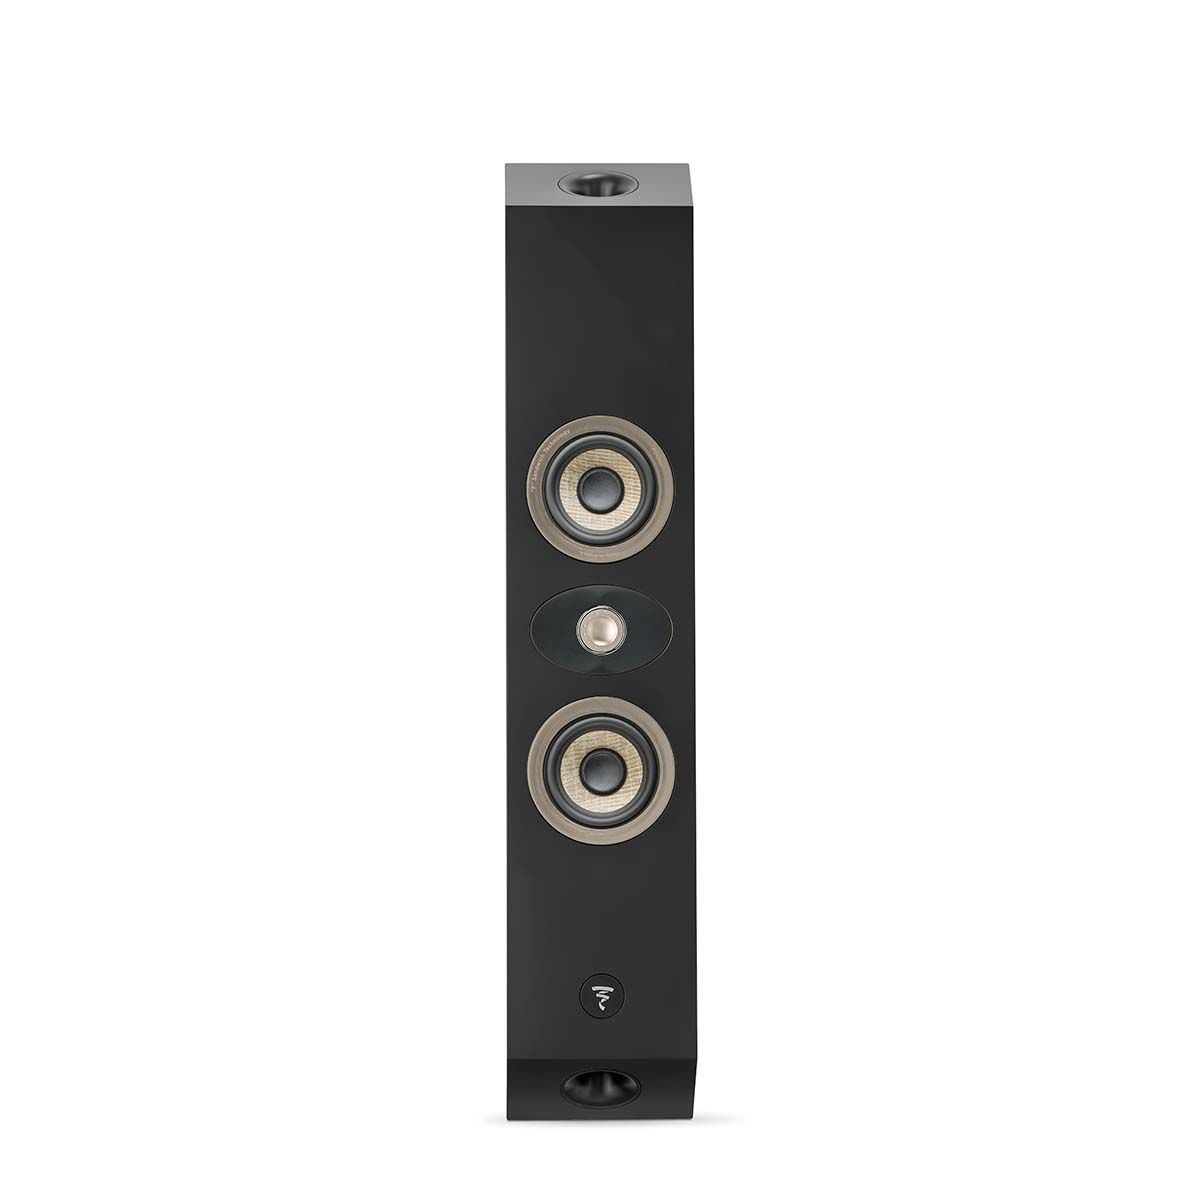 Focal On Wall 301 Speaker, Satin Black, vertical front view without grille